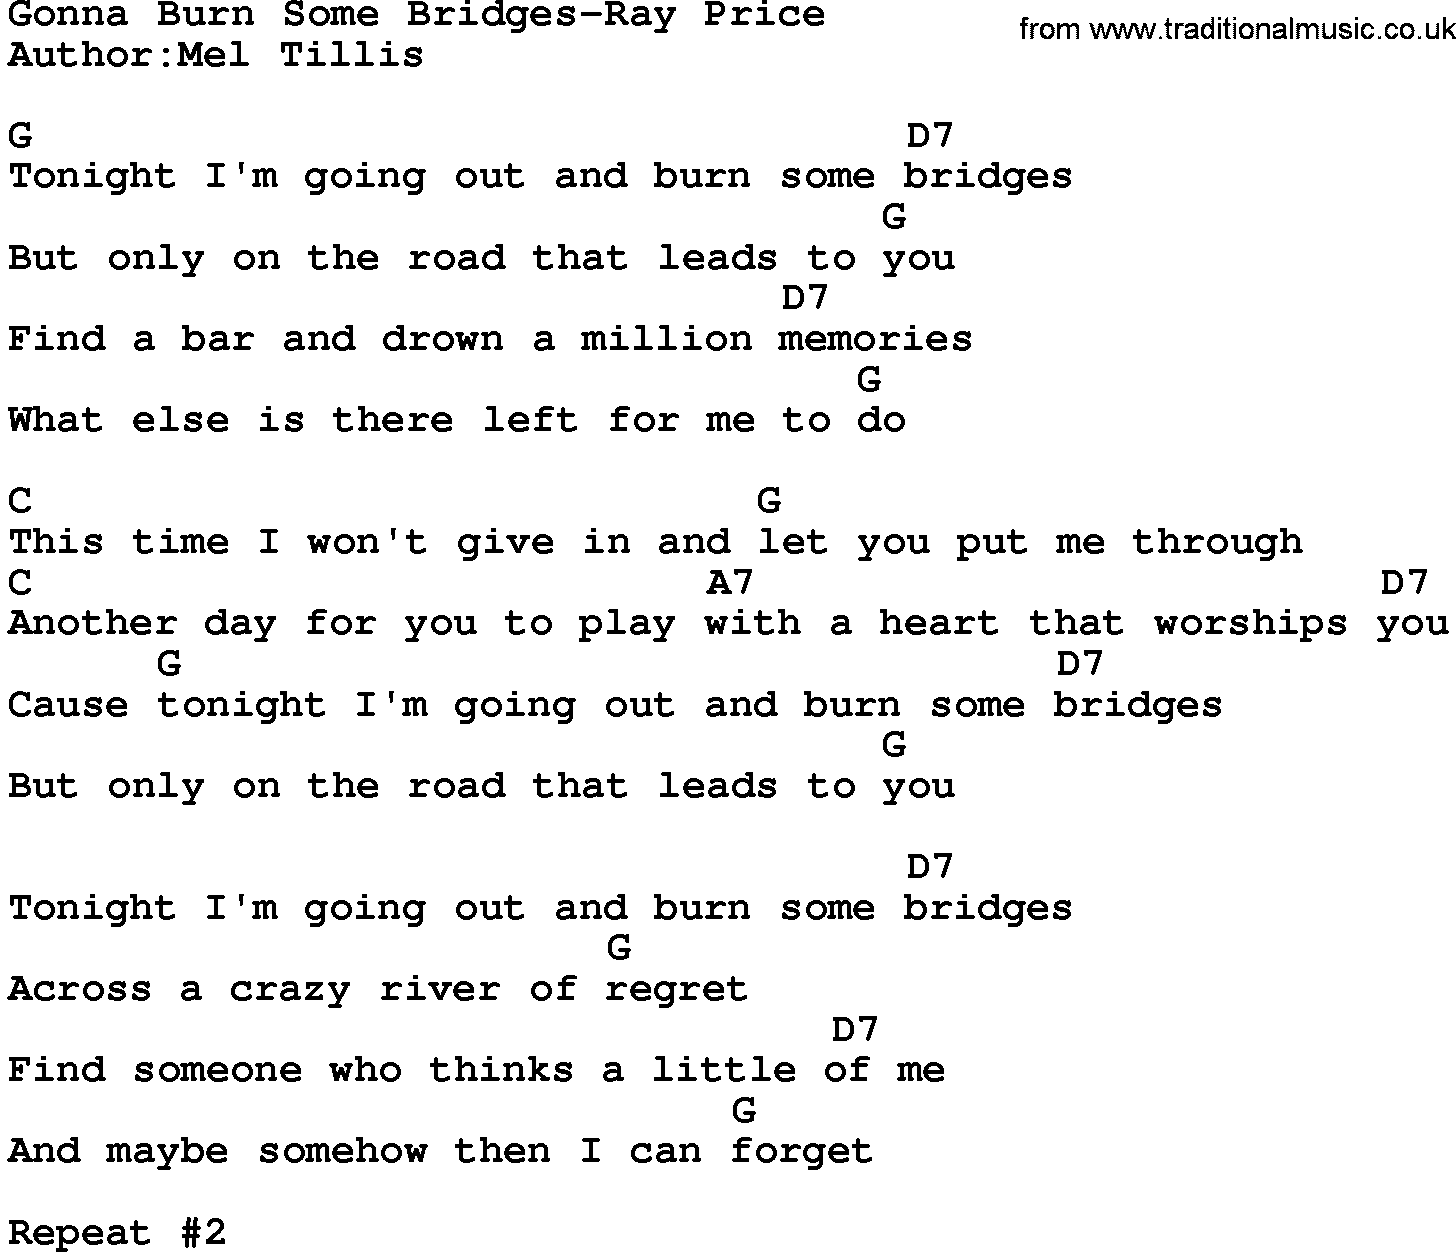 Country music song: Gonna Burn Some Bridges-Ray Price lyrics and chords